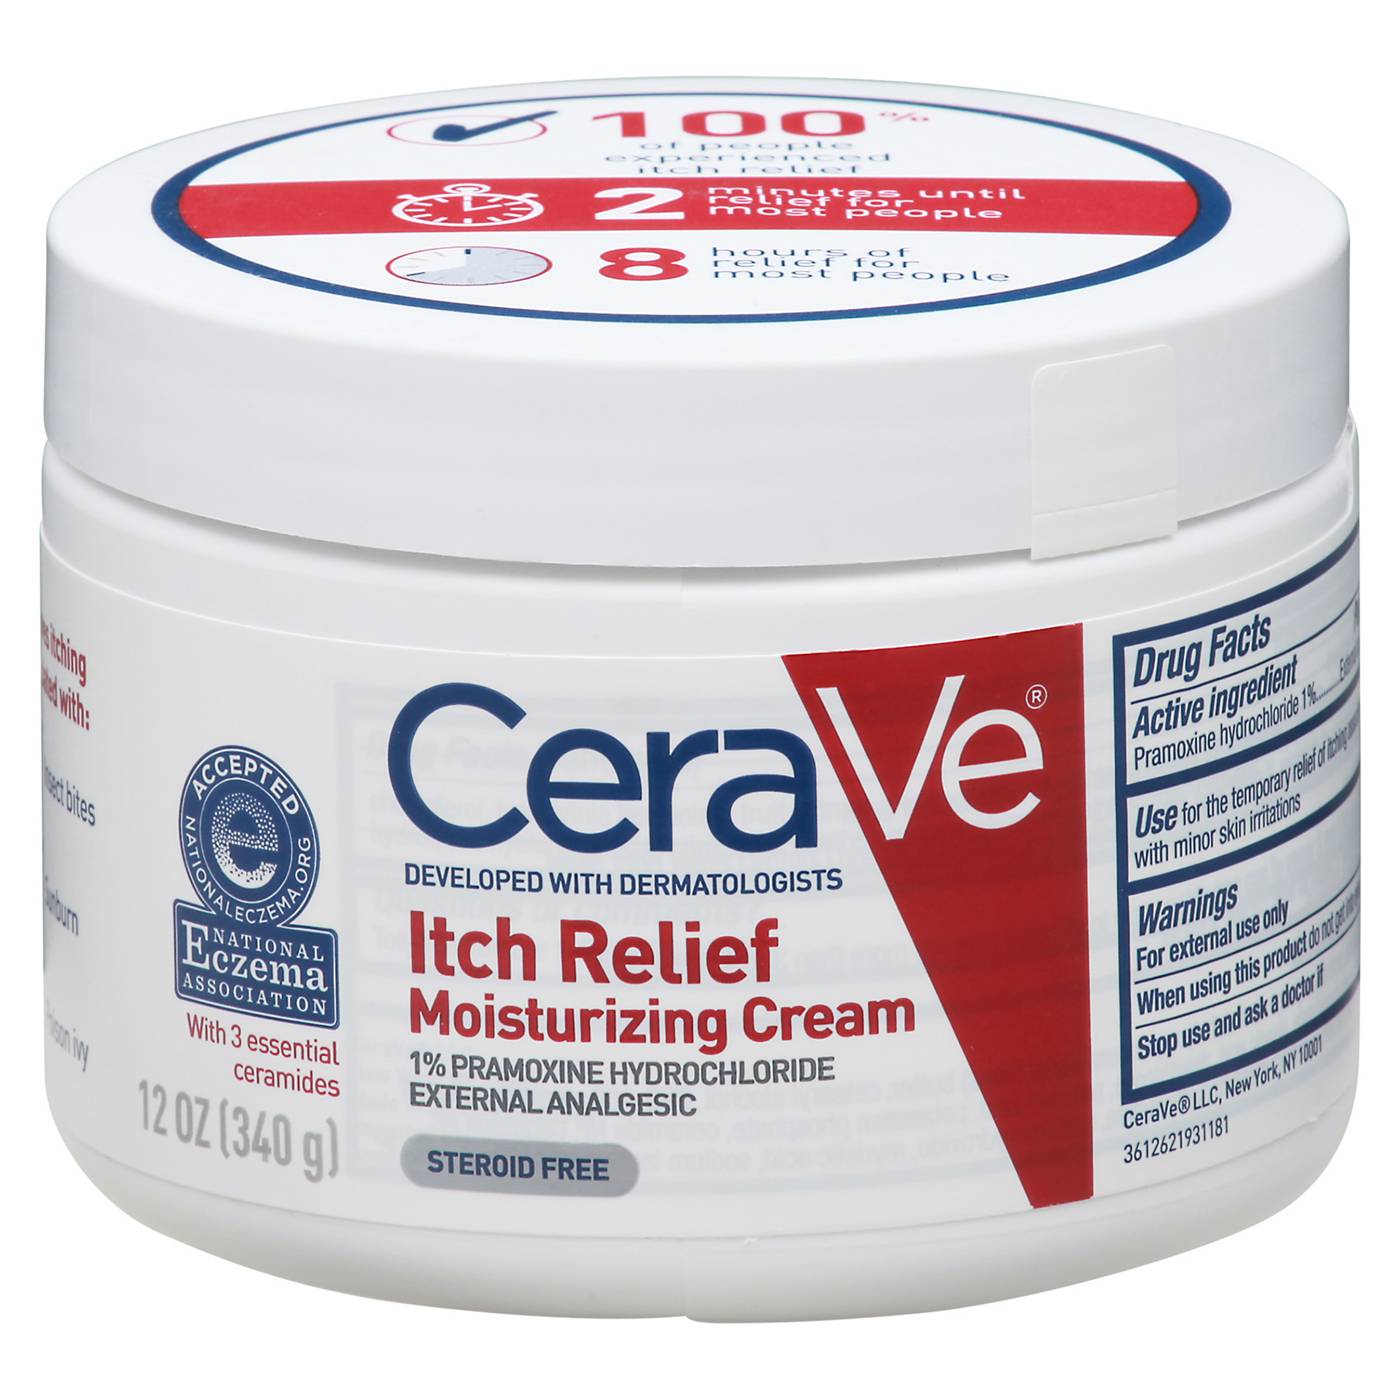 CeraVe Itch Relief Moisturizing Cream; image 1 of 3